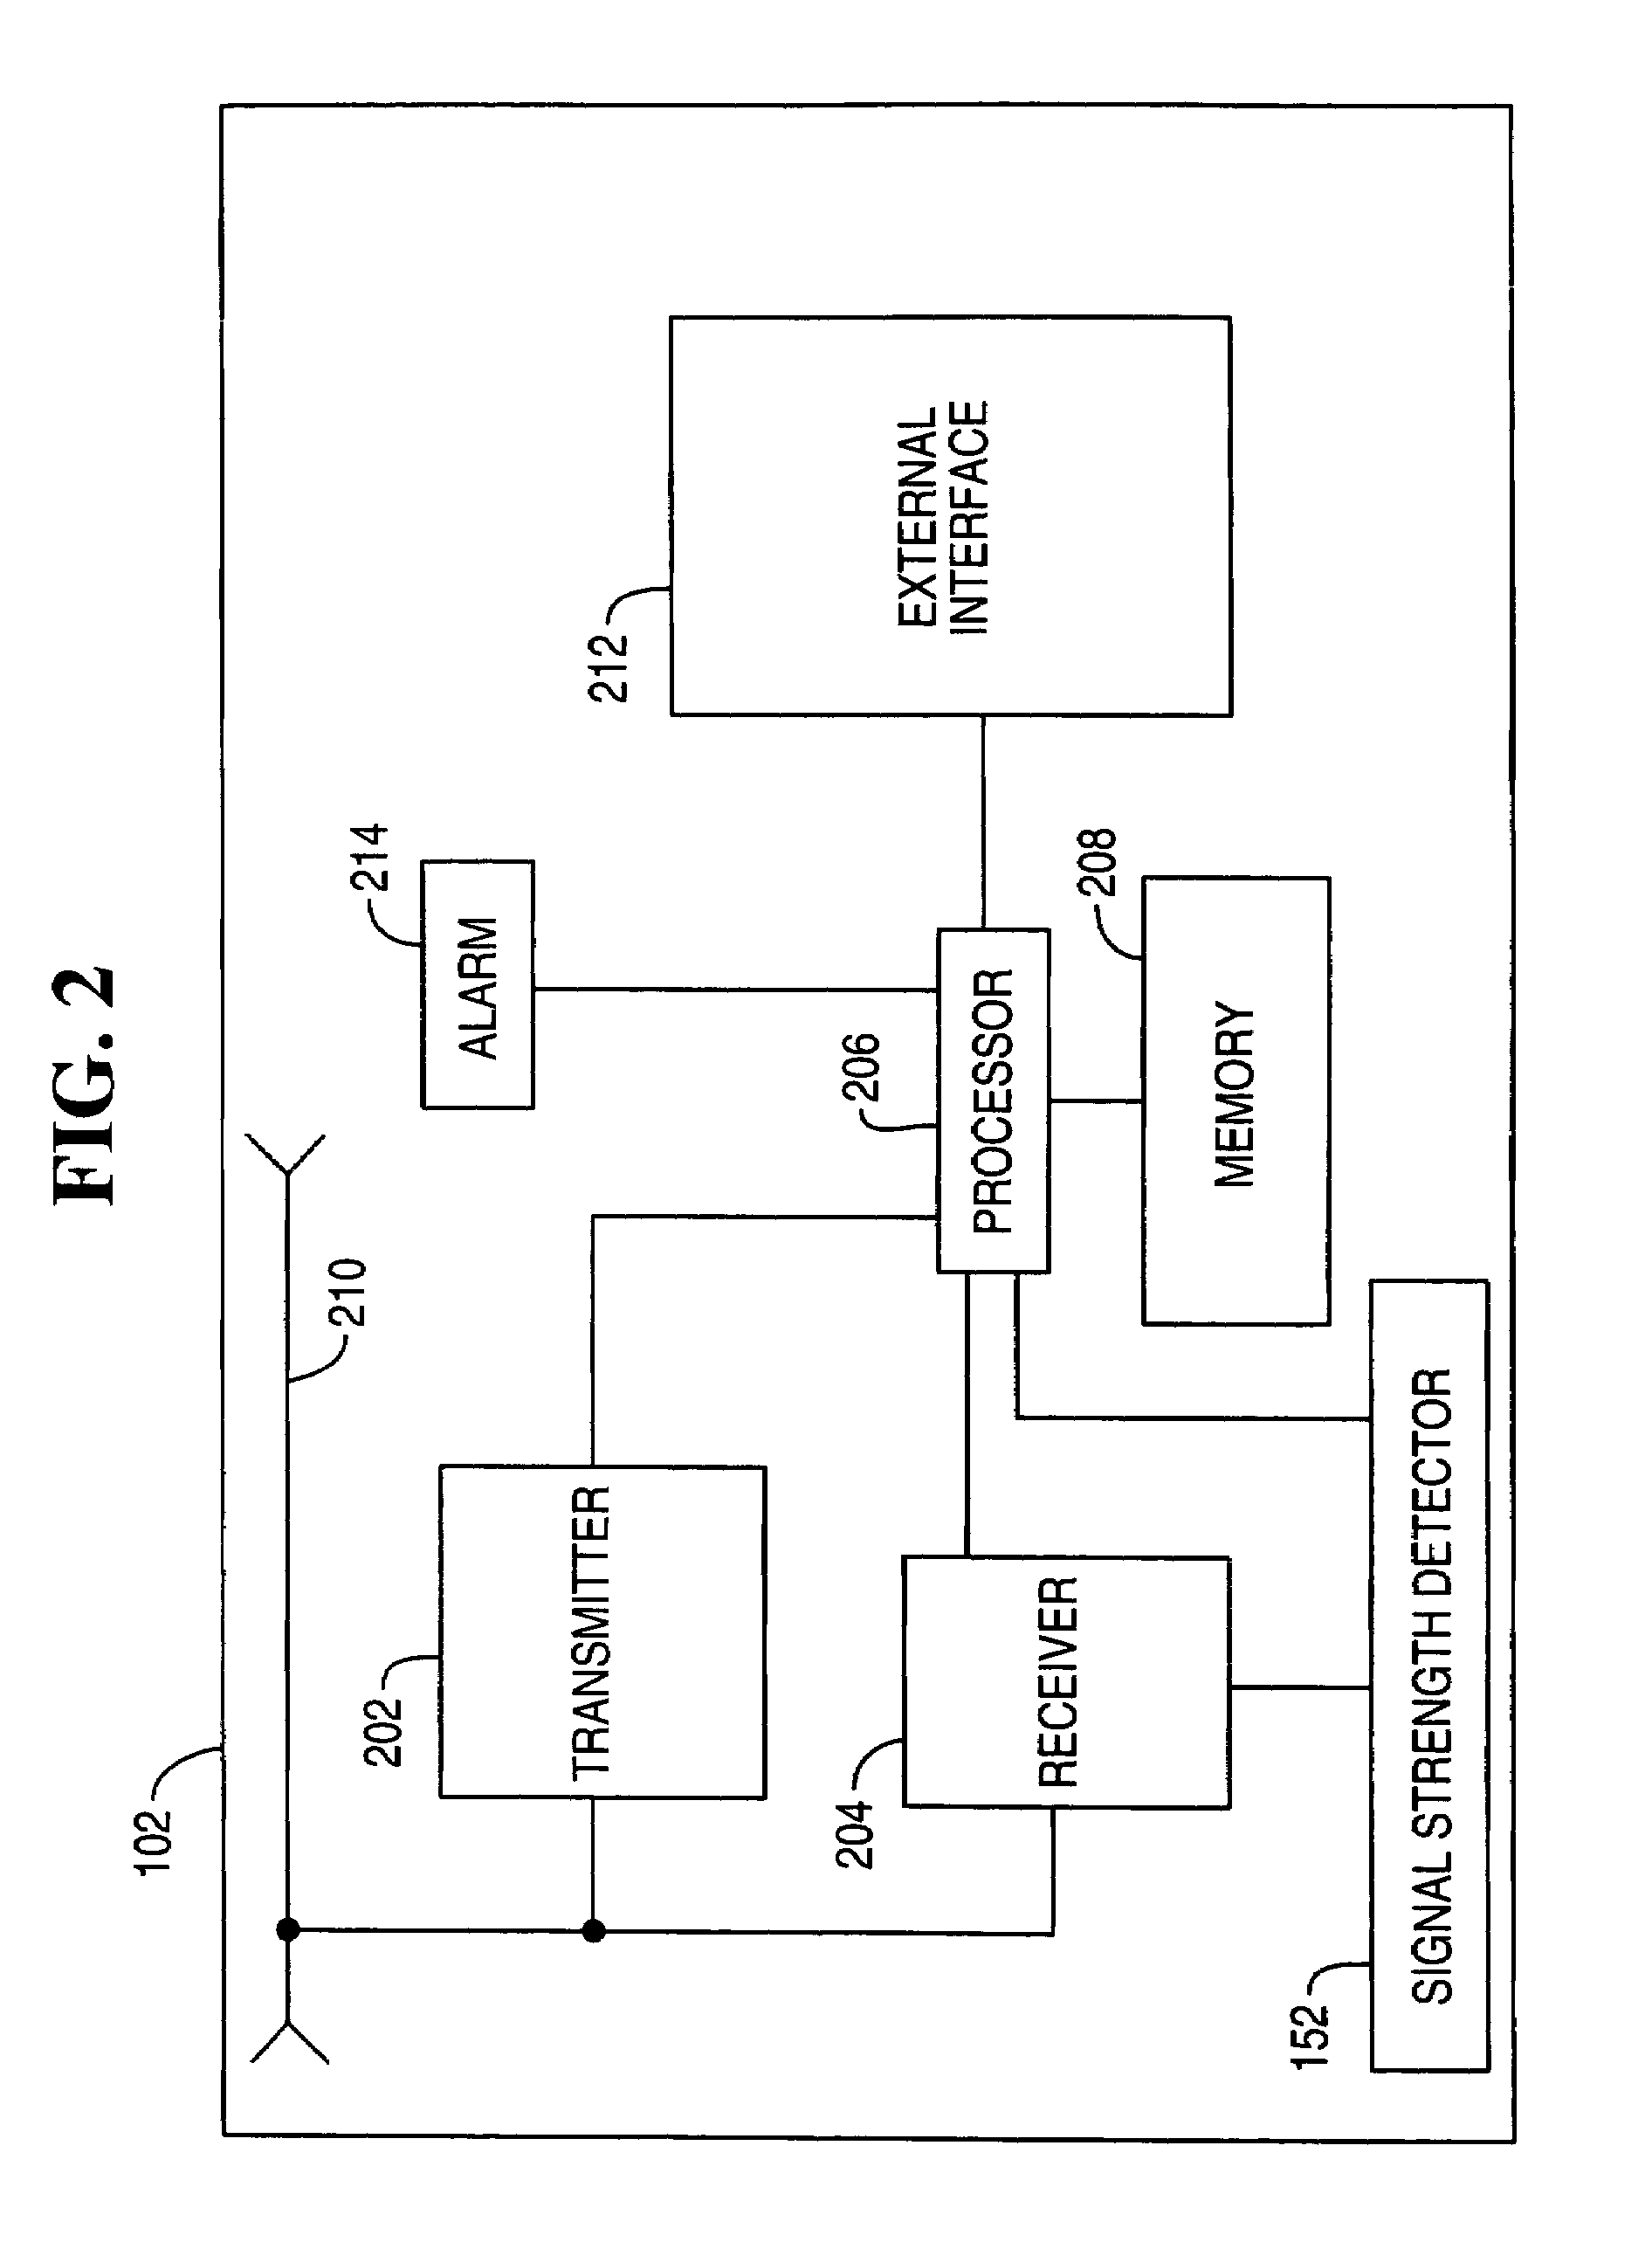 Anti-jamming detector for radio frequency identification systems